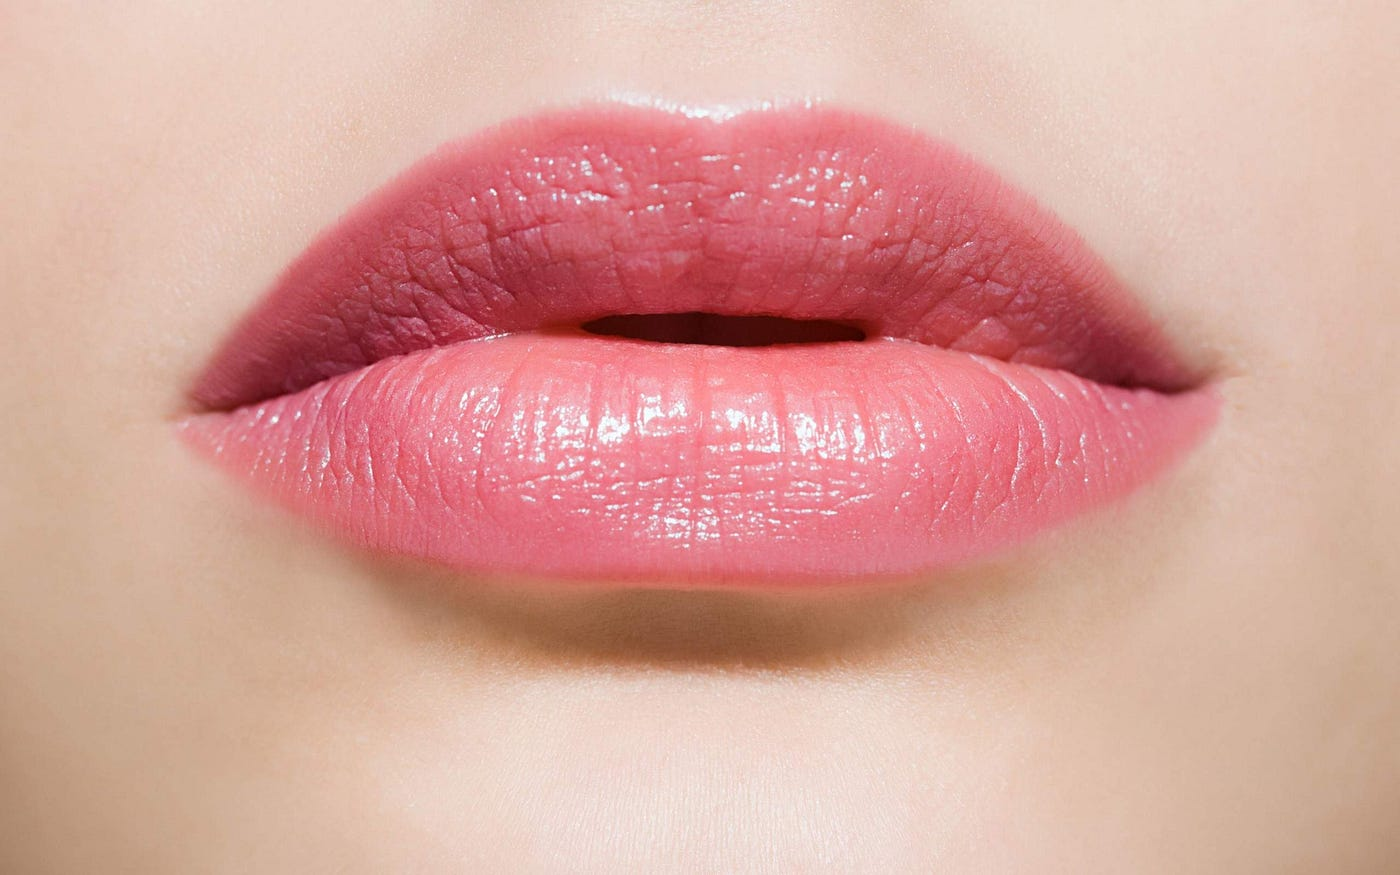 Natural Pink Lip: Tips and Tricks for Achieving and Maintaining Healthy Lips